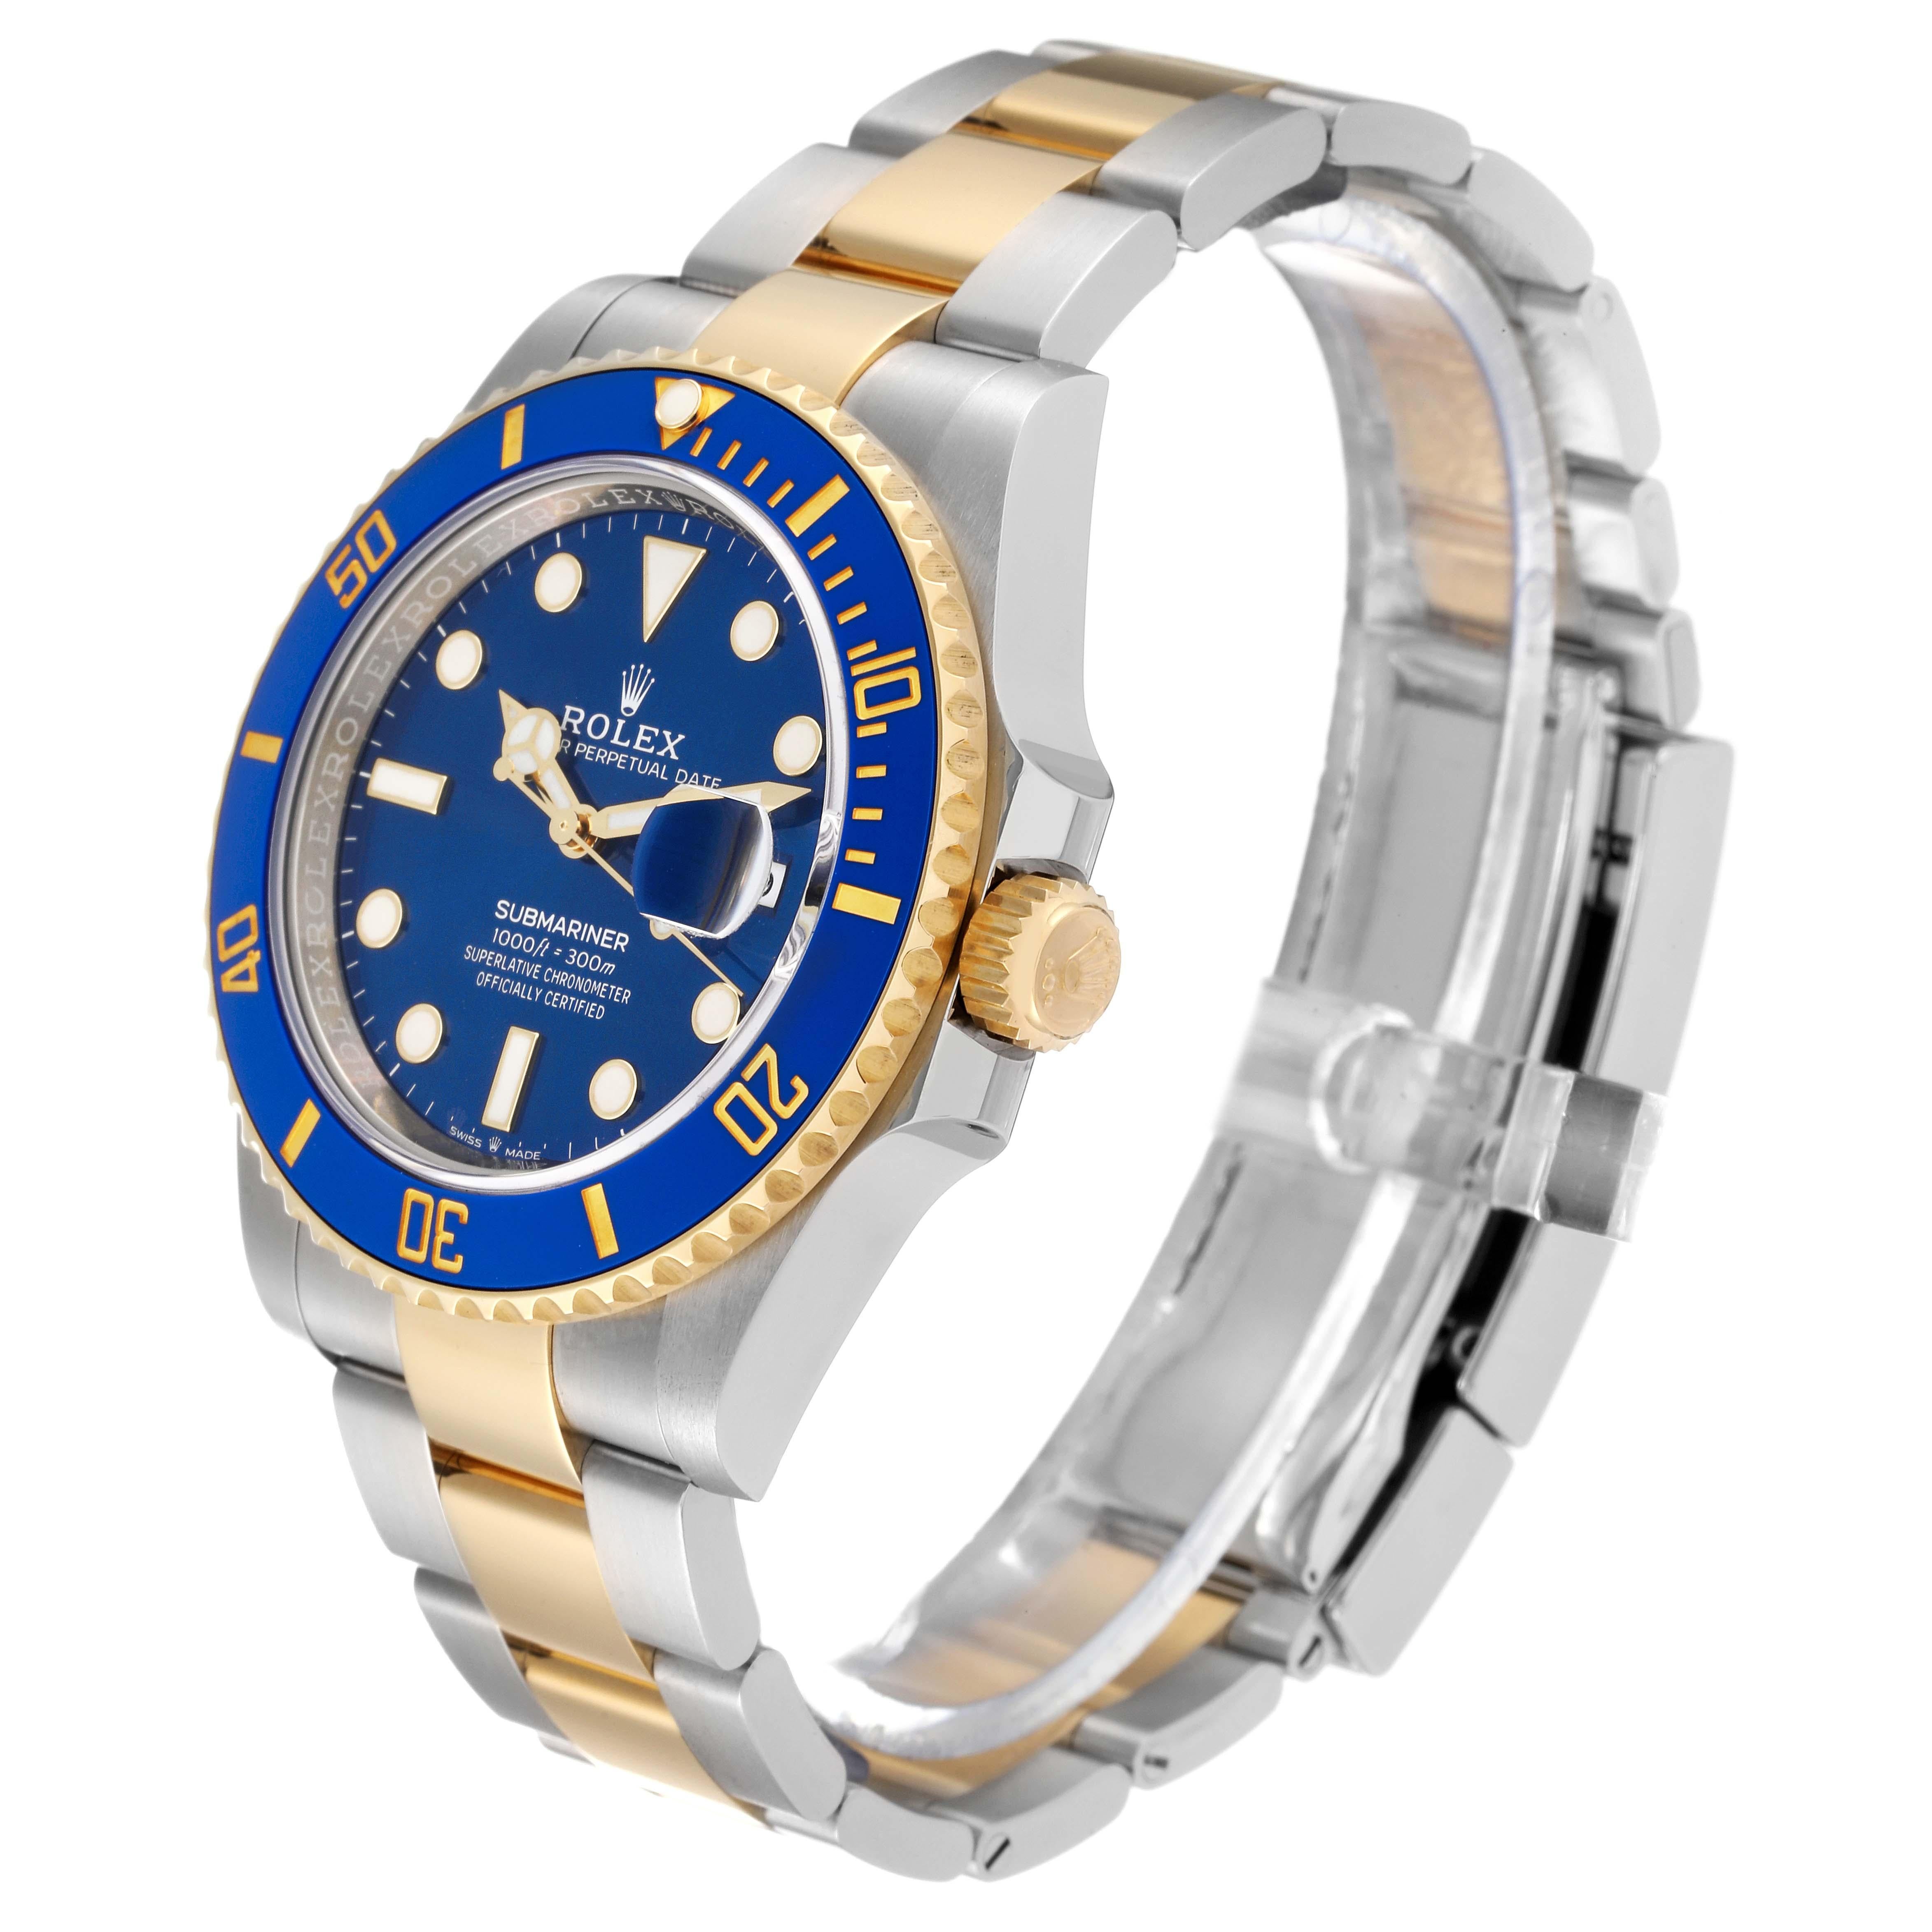 Men's Rolex Submariner 41 Steel Yellow Gold Blue Dial Mens Watch 126613 Box Card For Sale